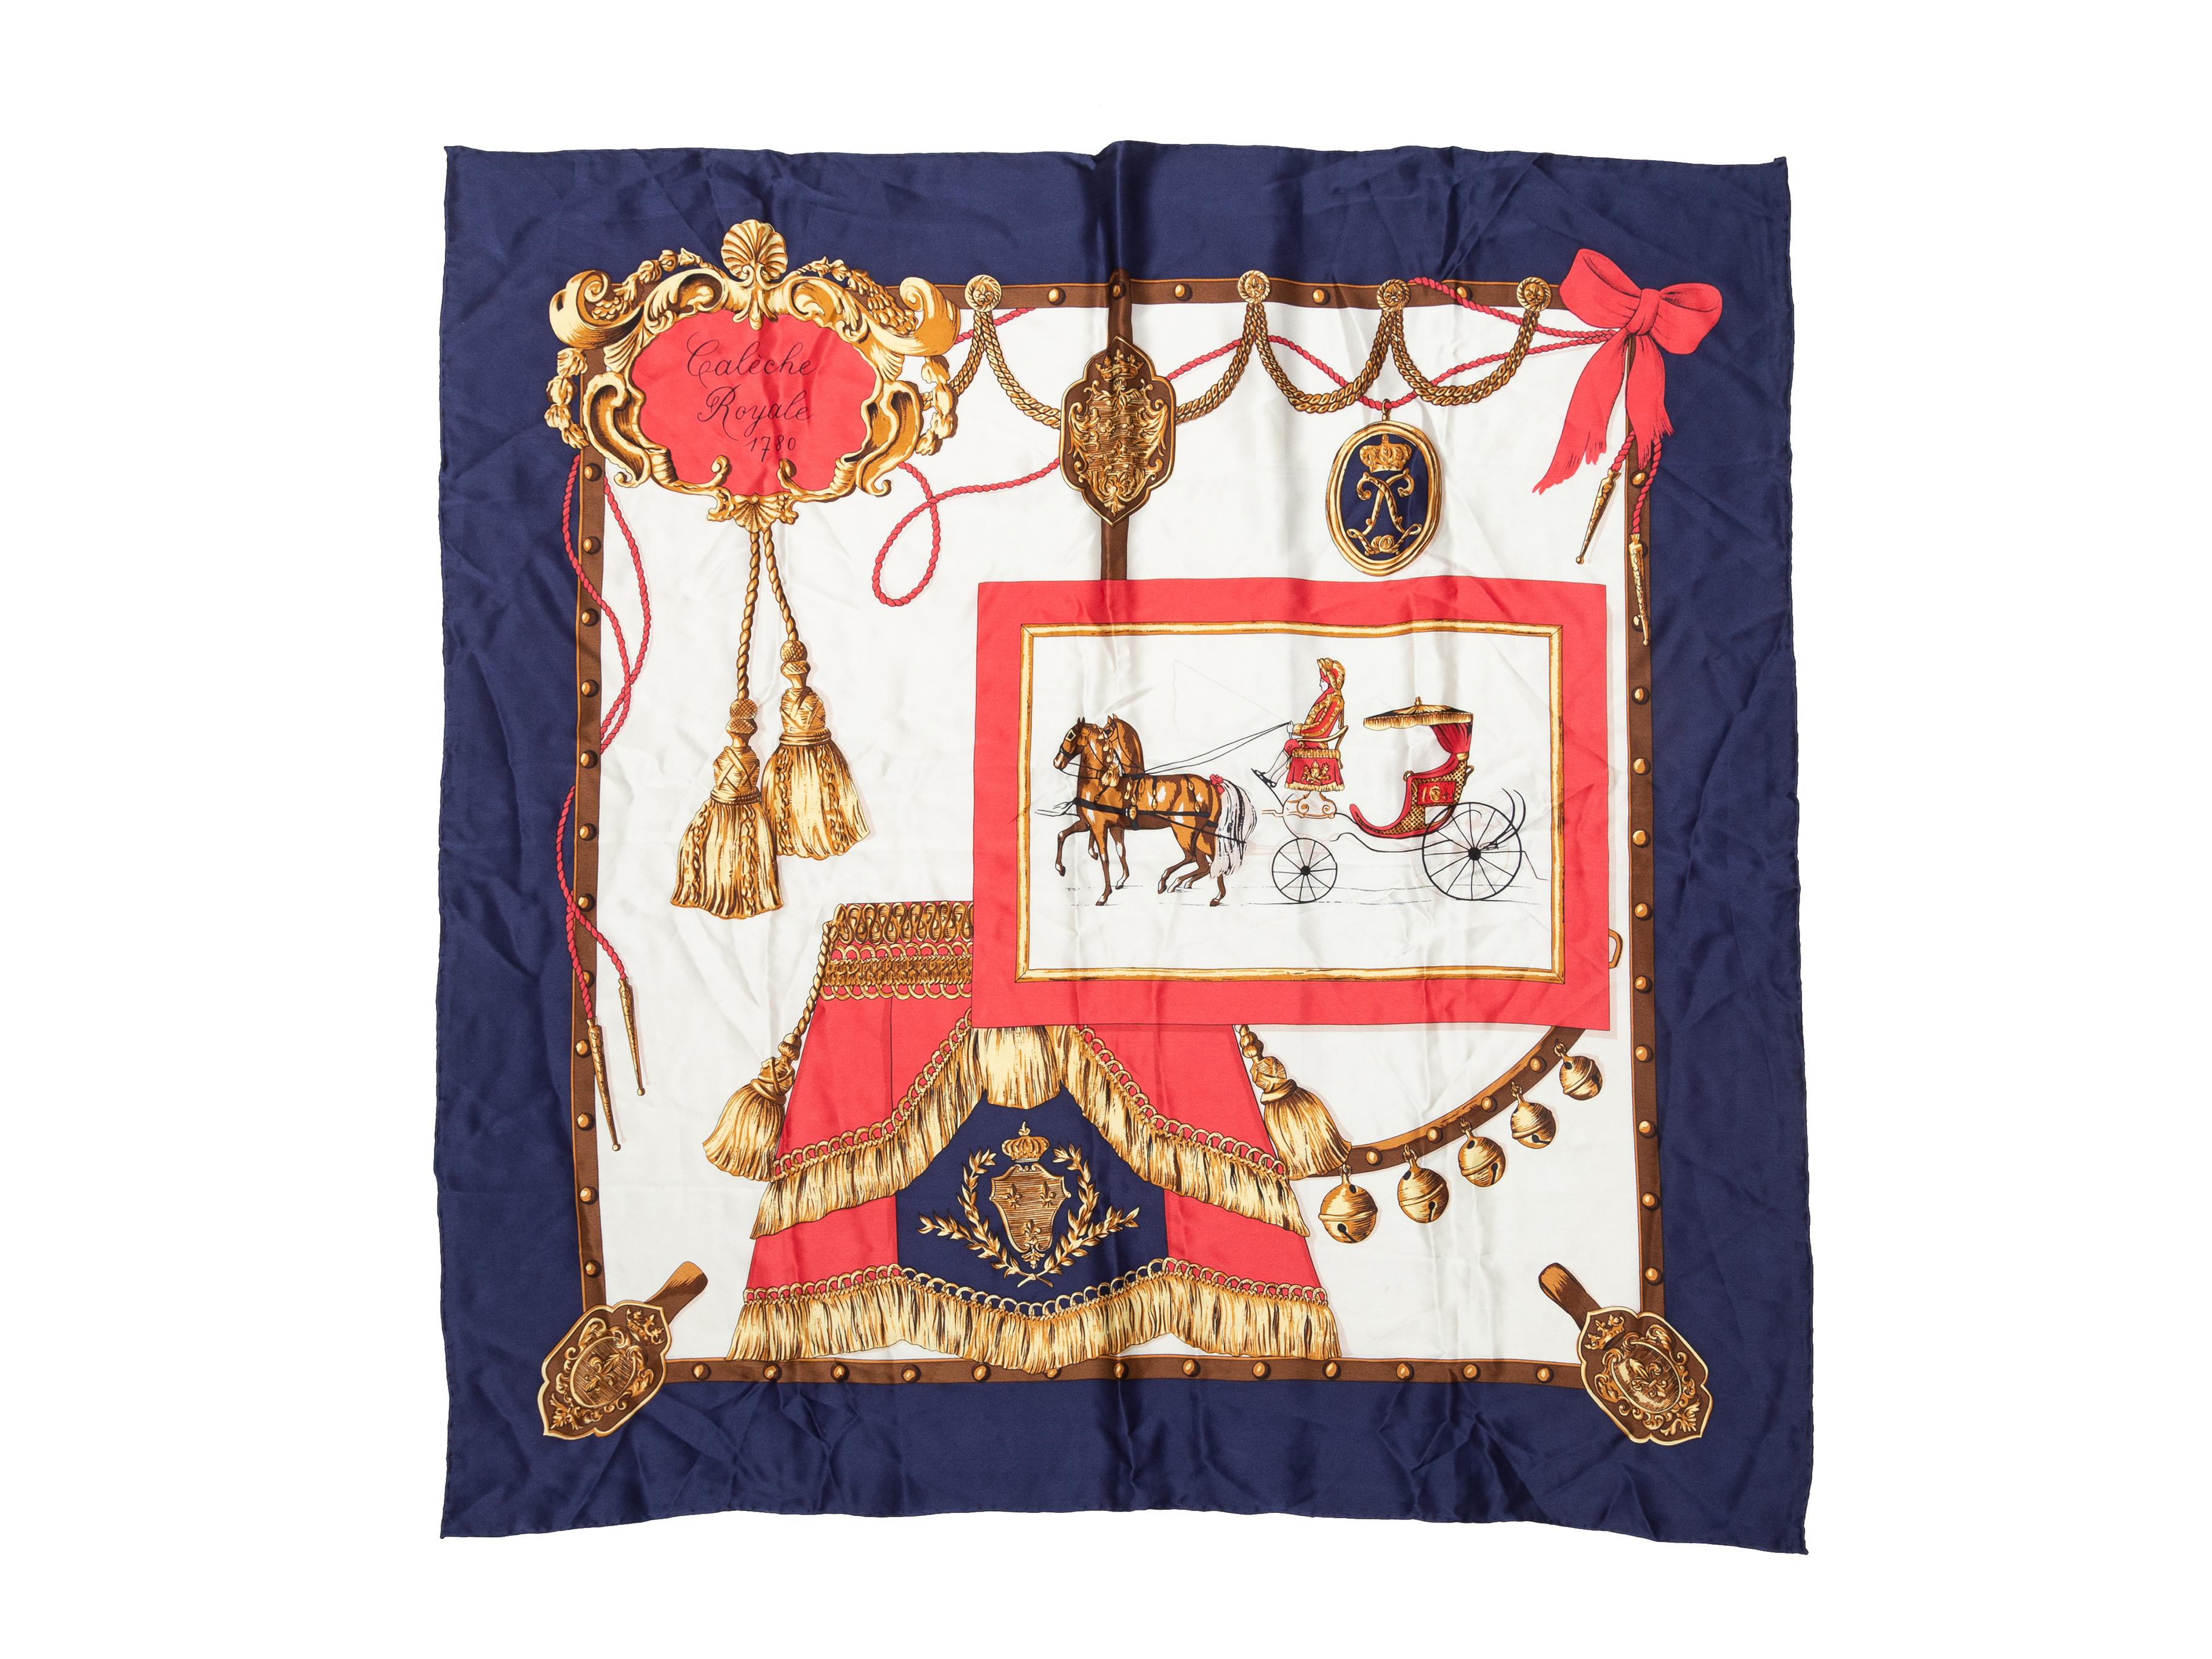 Product details: Navy and multicolor 'Caleche Royale' print silk scarf by Hermes. 34